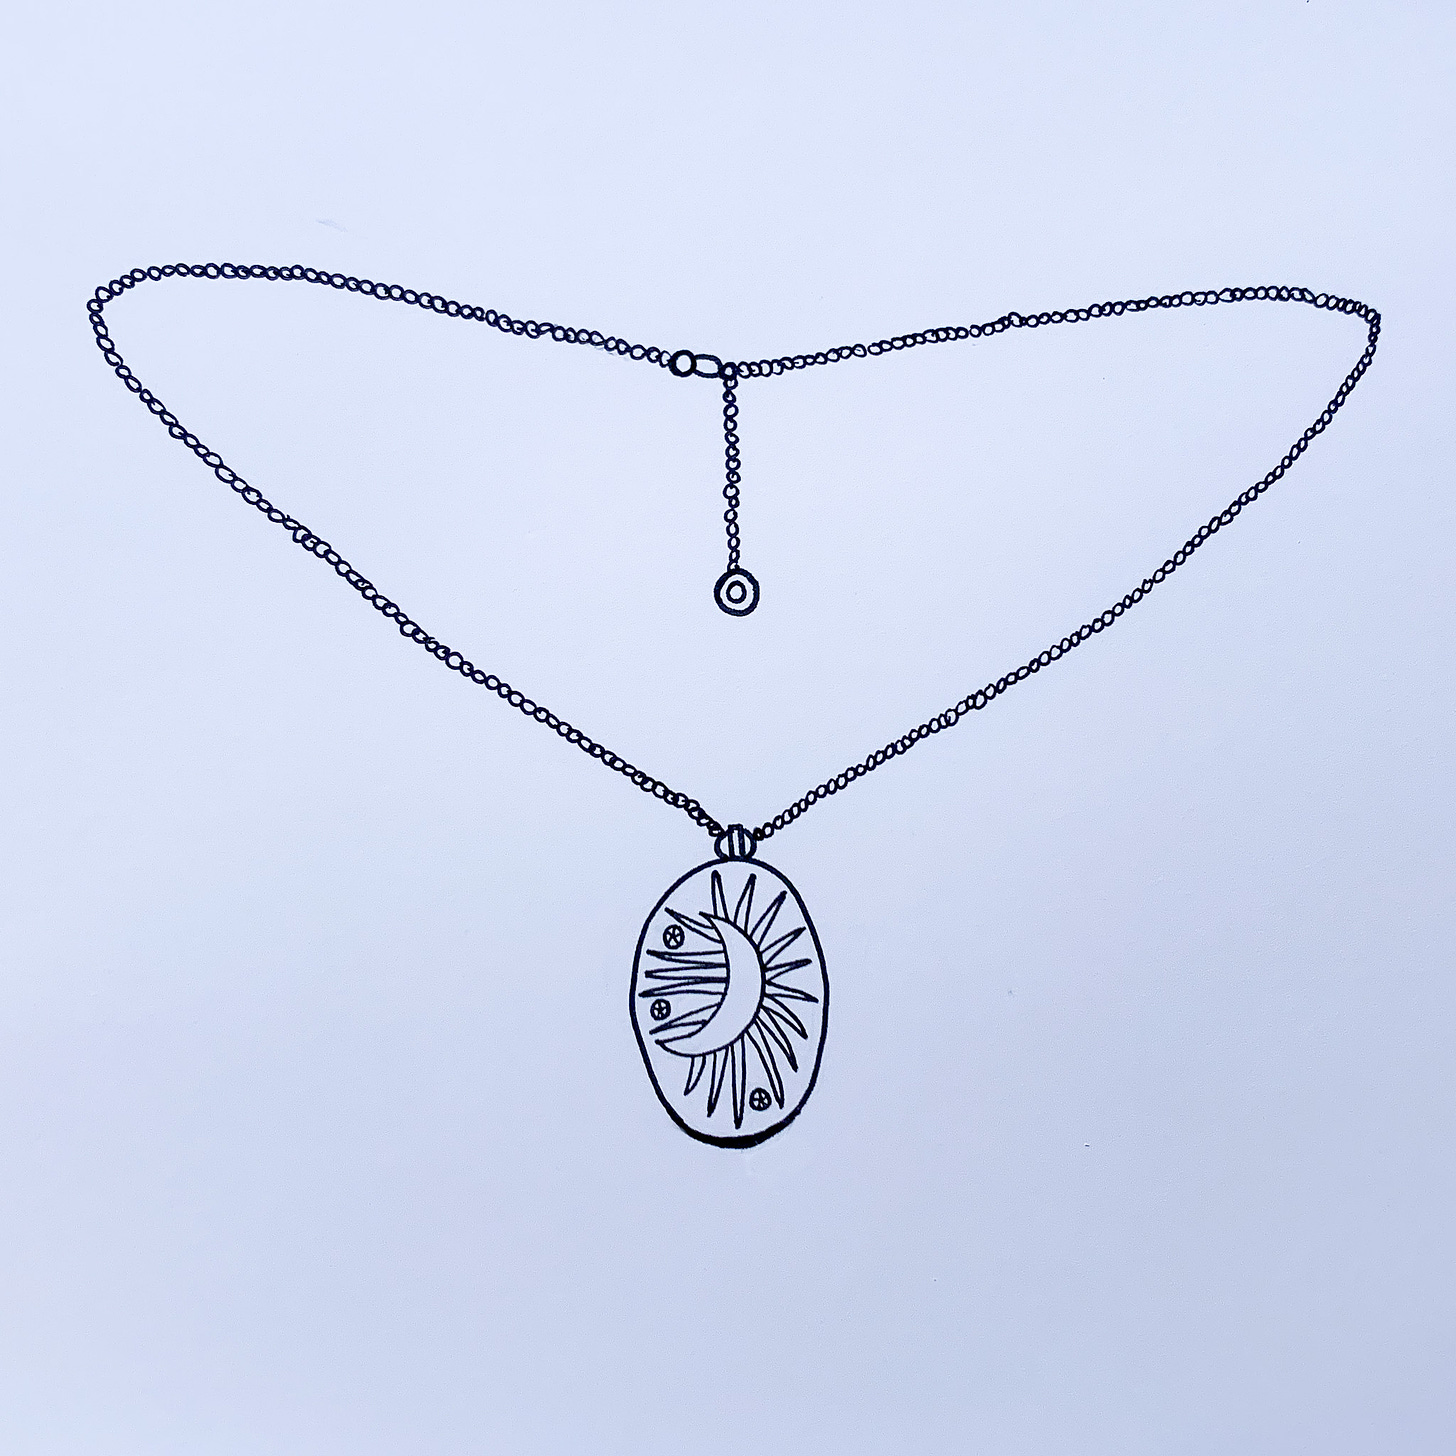 Black and white line drawing of chain necklace with a pendant that has a starburst behind a moon and three small crystal stars